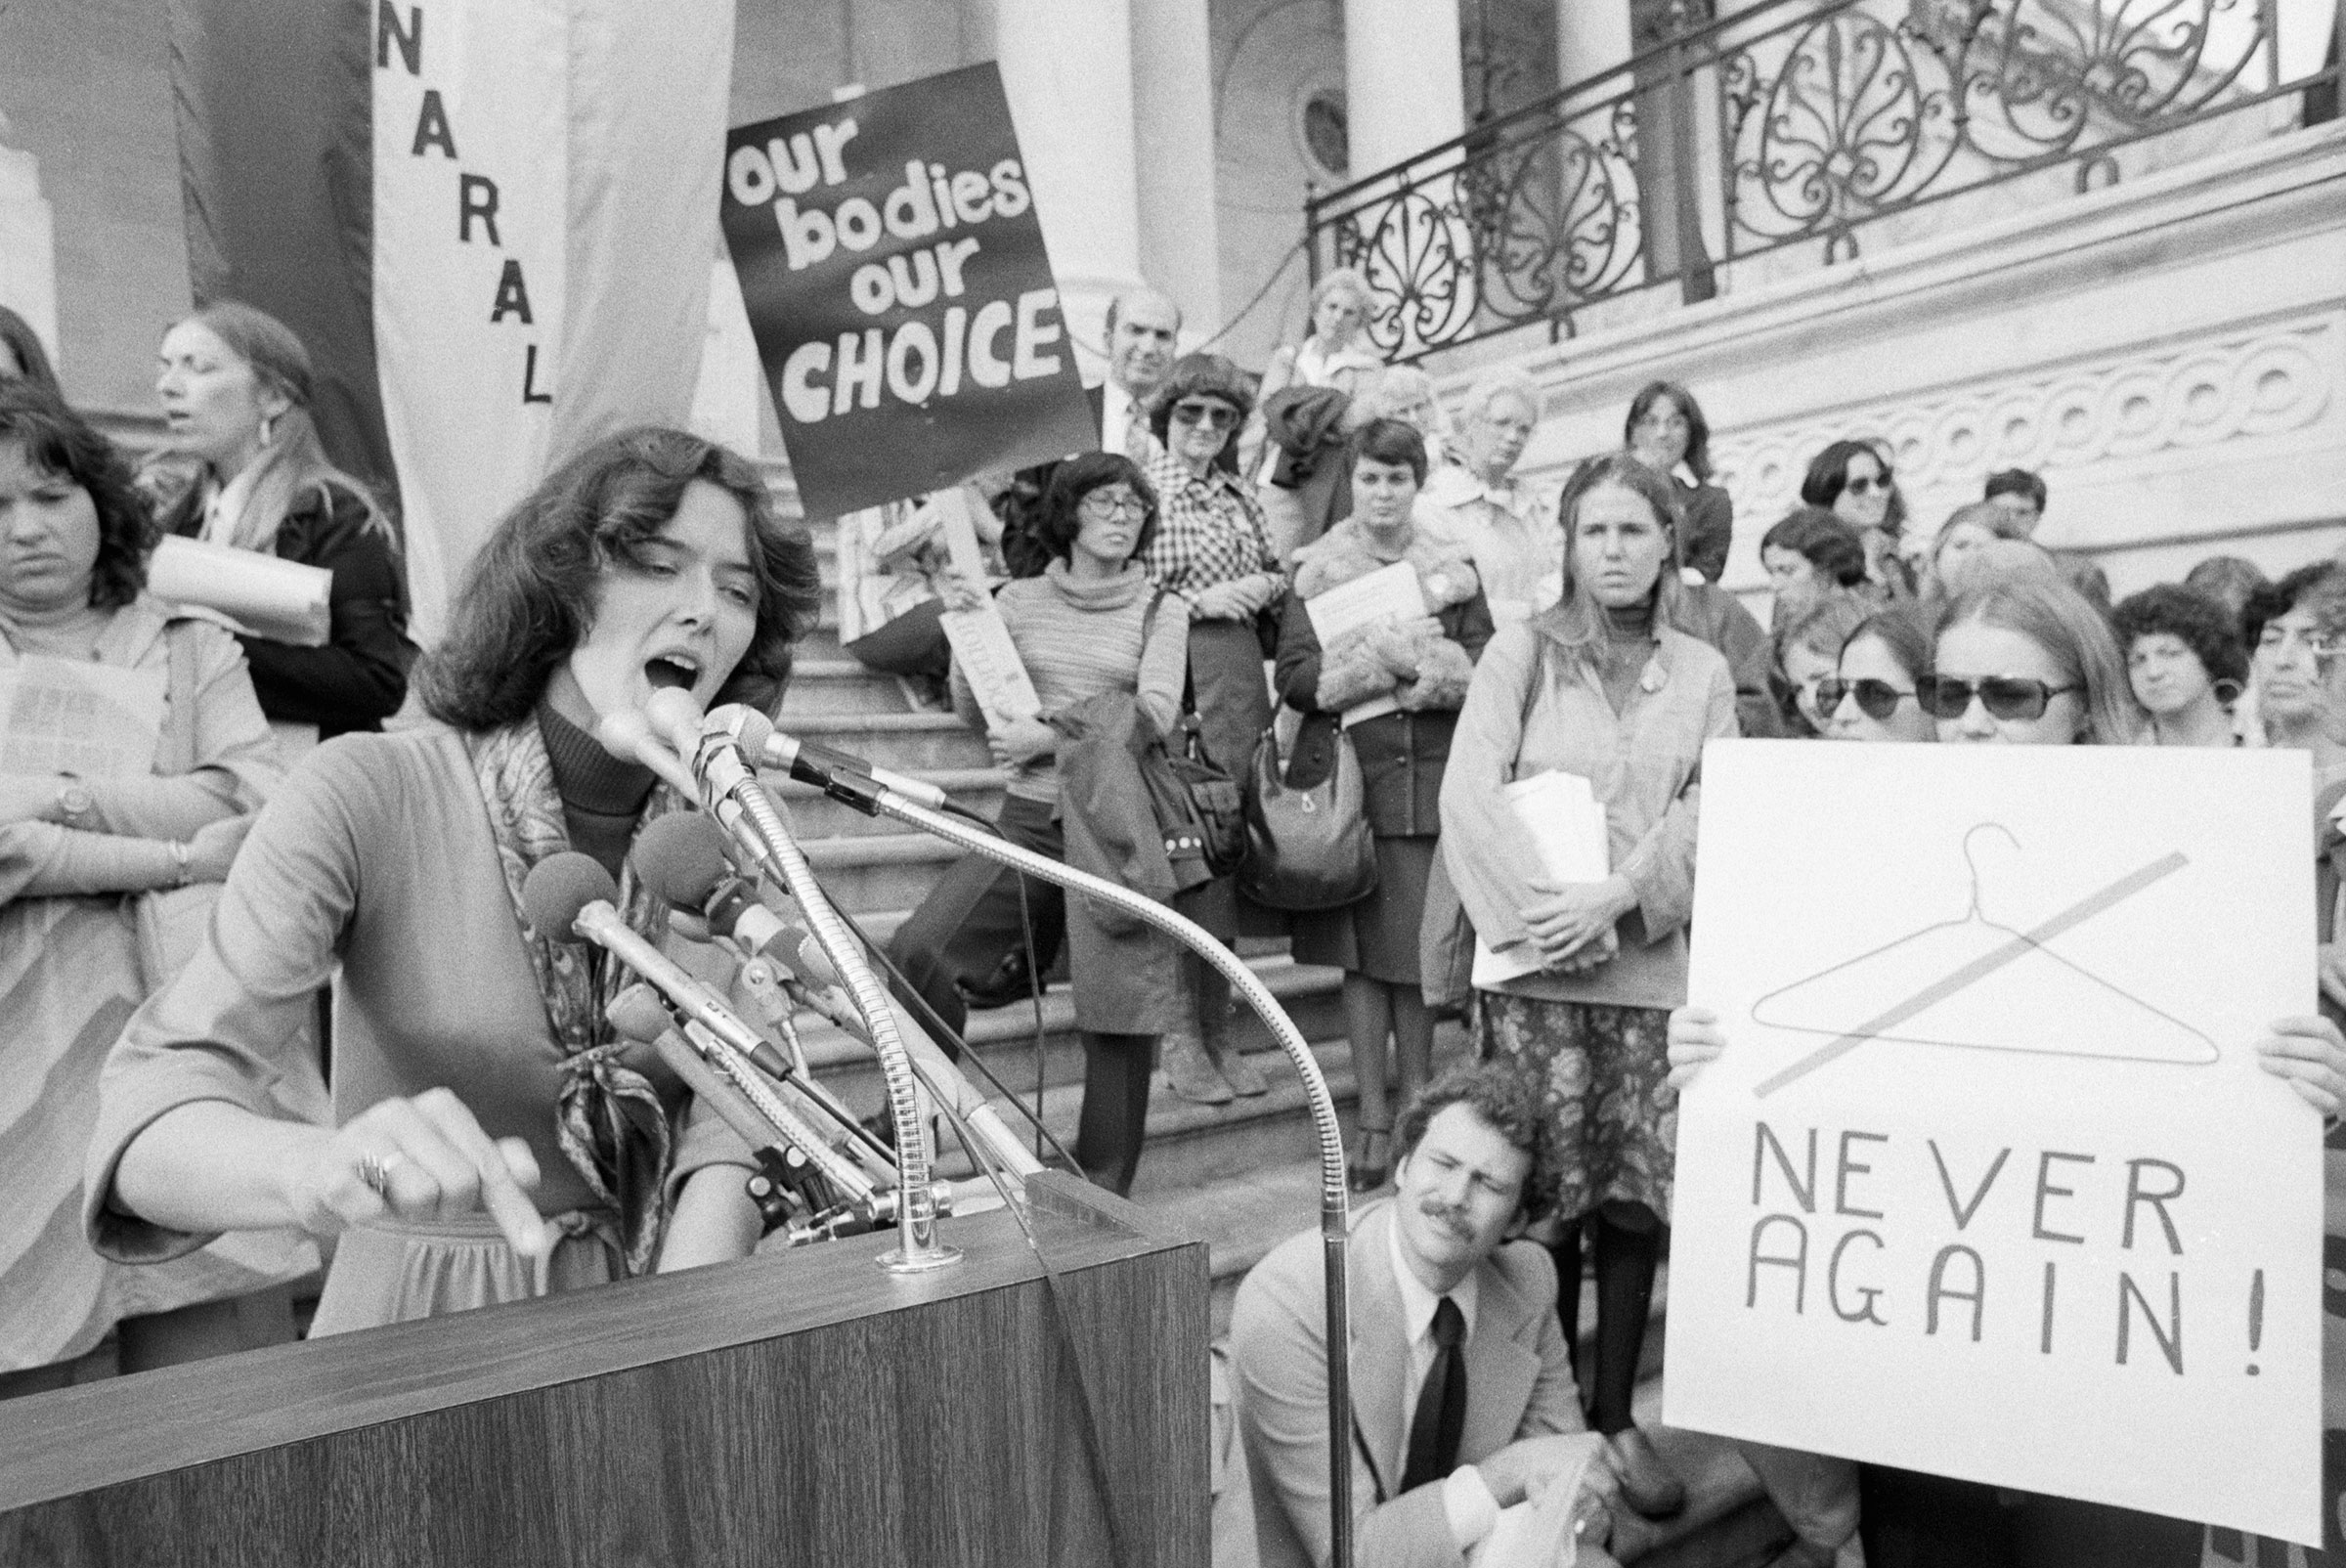 Schroeder addresses a rally of pro-abortion activists on the Capitol steps in Washington, 1977. (Bettmann Archive/Getty Images)